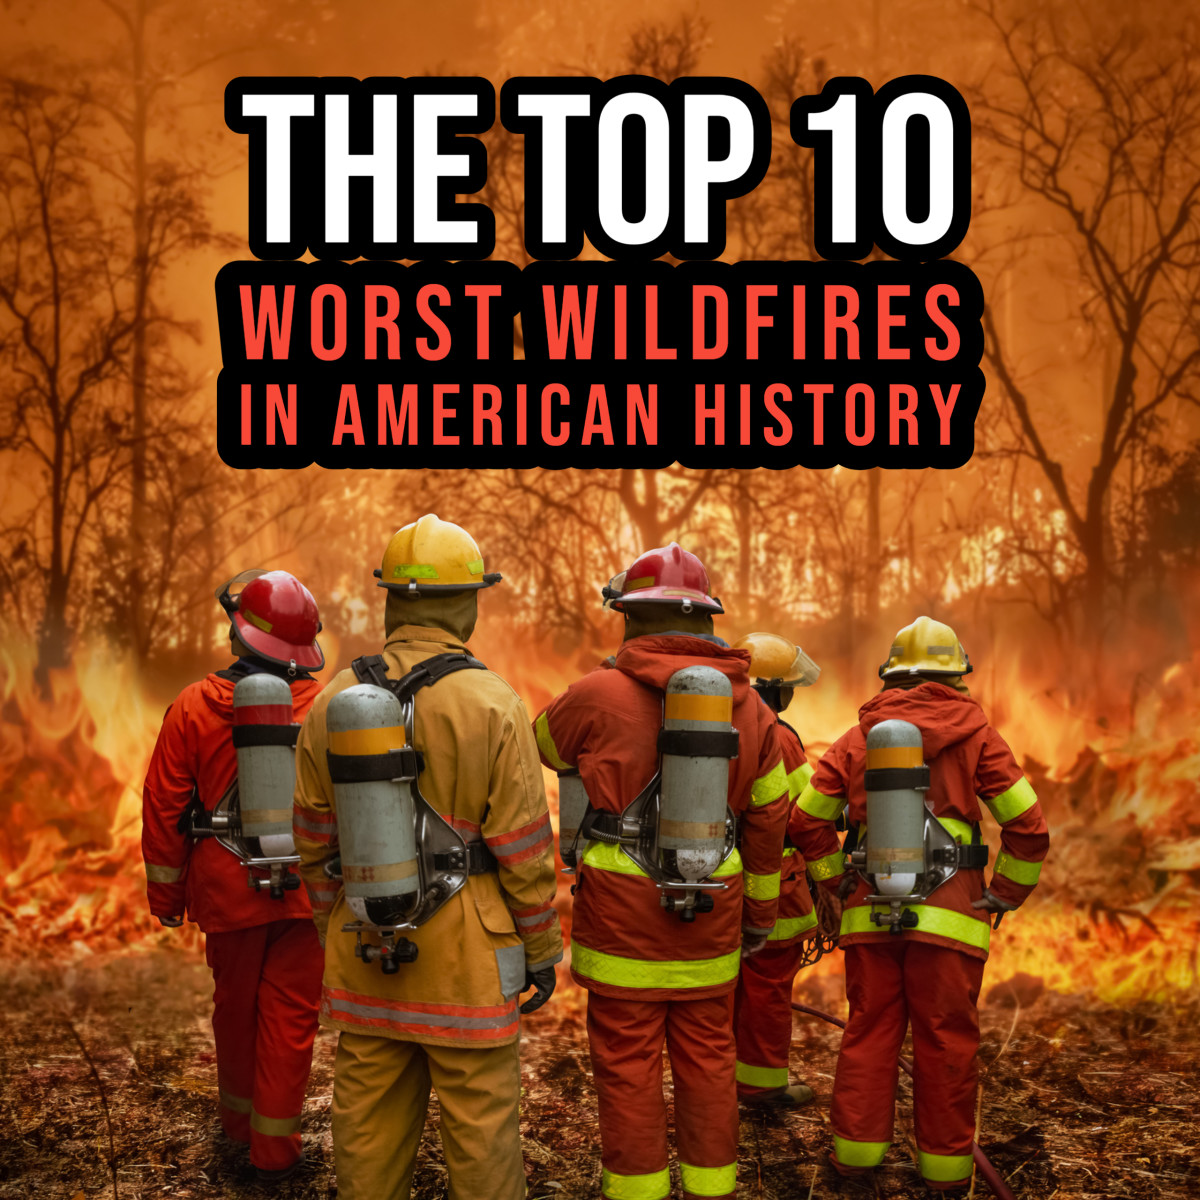 From the Thumb Fire of 1881 to the California Wildfires of 2020, this article ranks the 10 worst wildfires in American history.